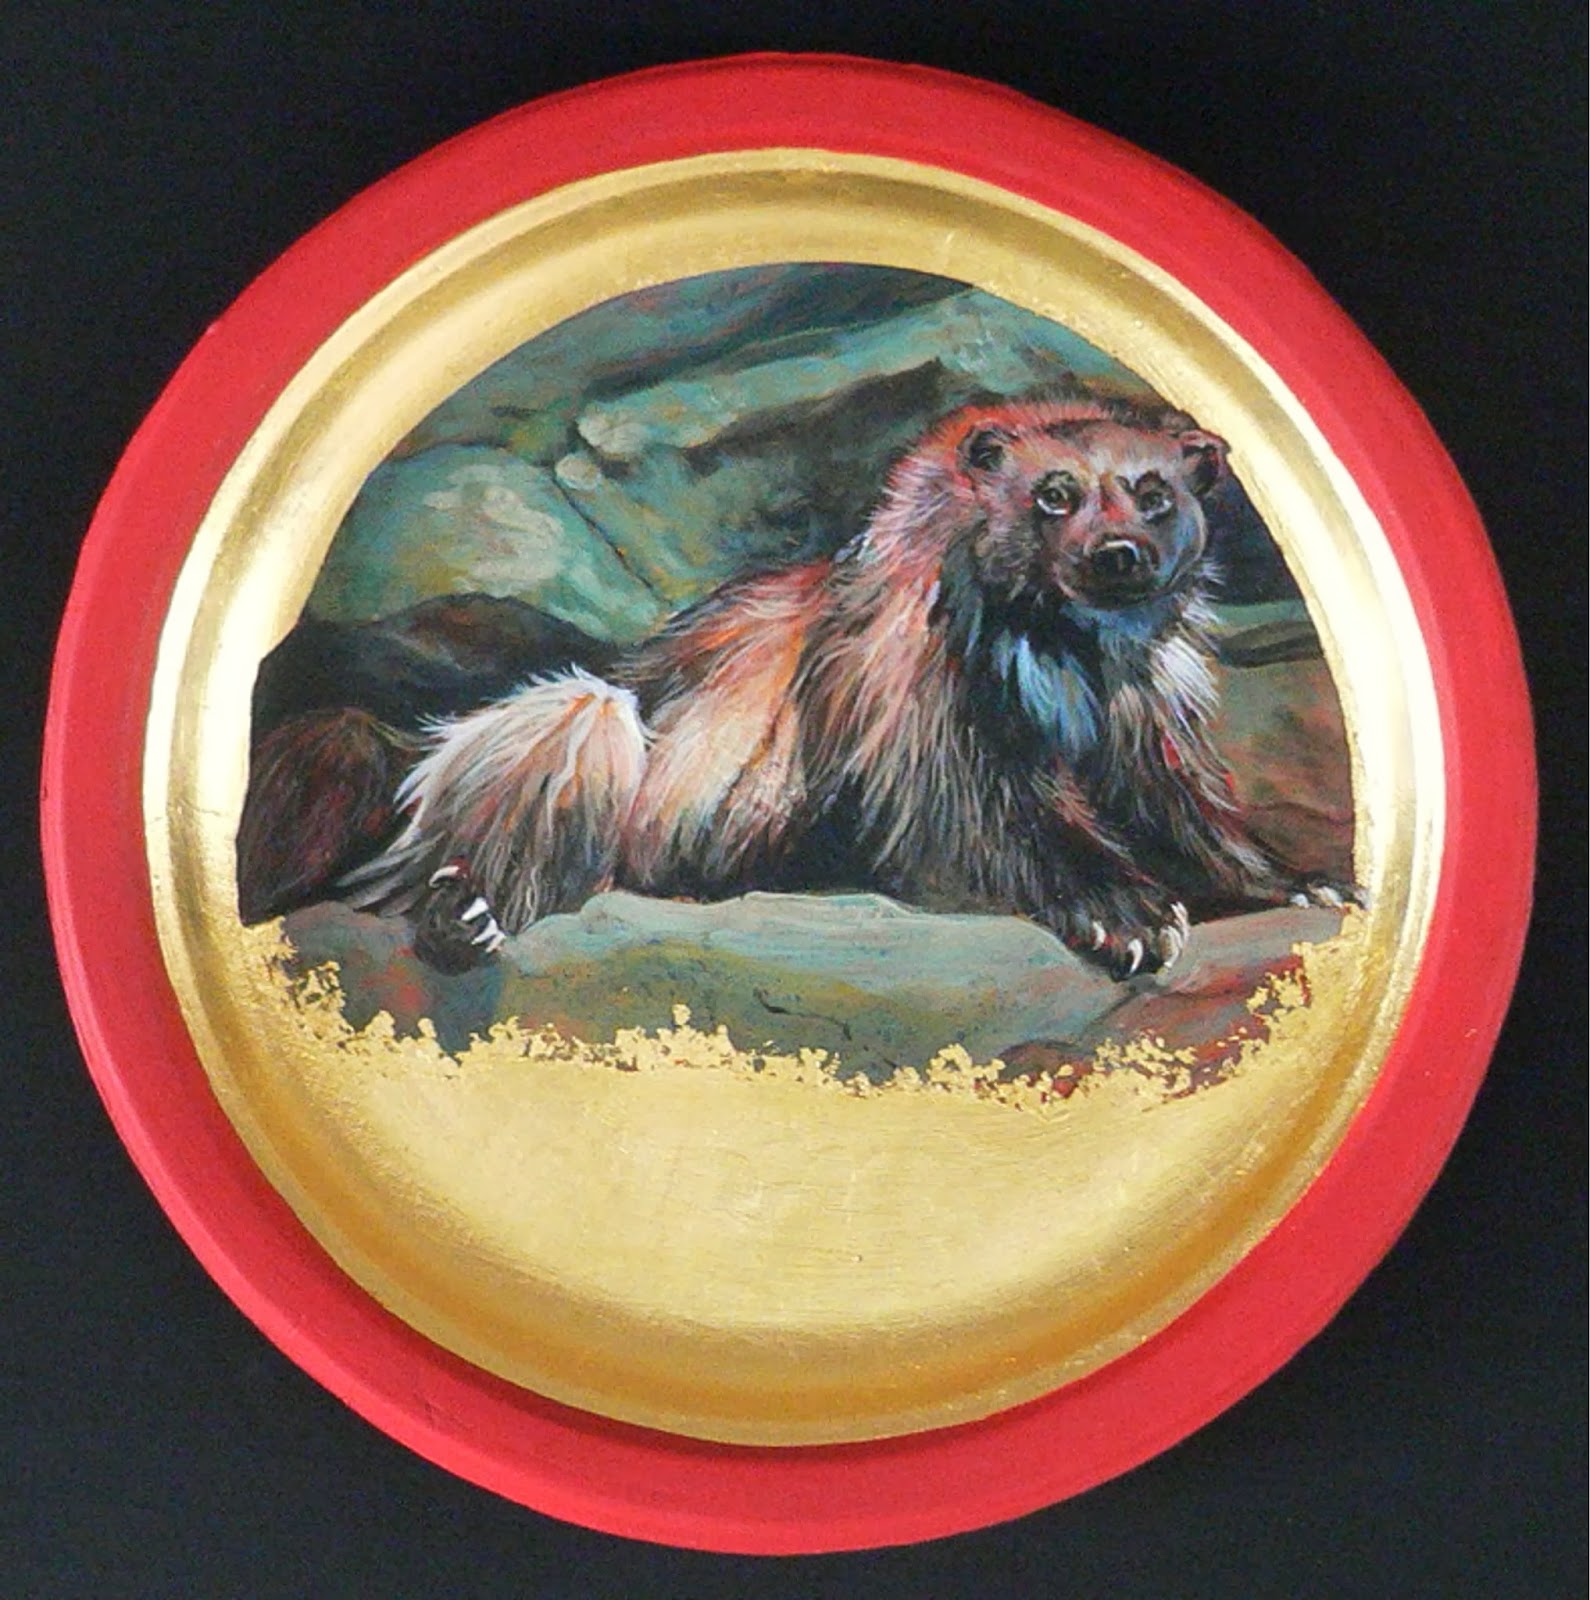 Wolverine, Egg tempera, 23 c. gold on paper plate, $450